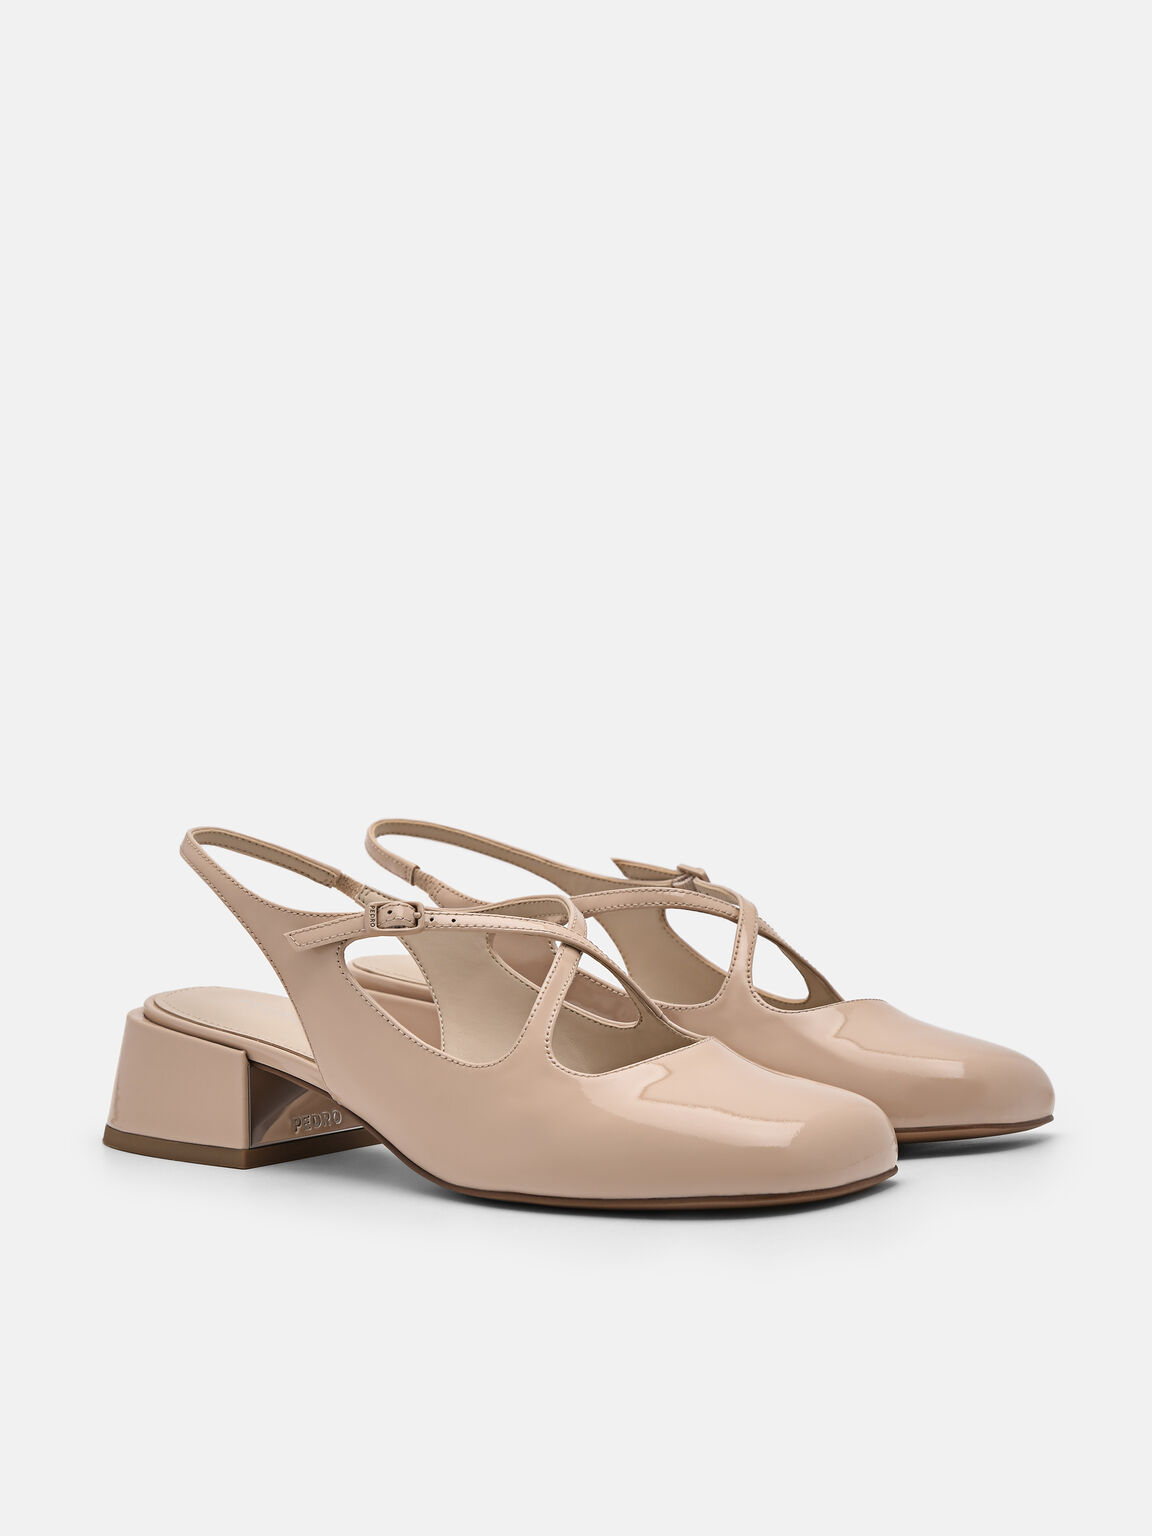 Effie Leather Mary Jane Pumps, Nude, hi-res